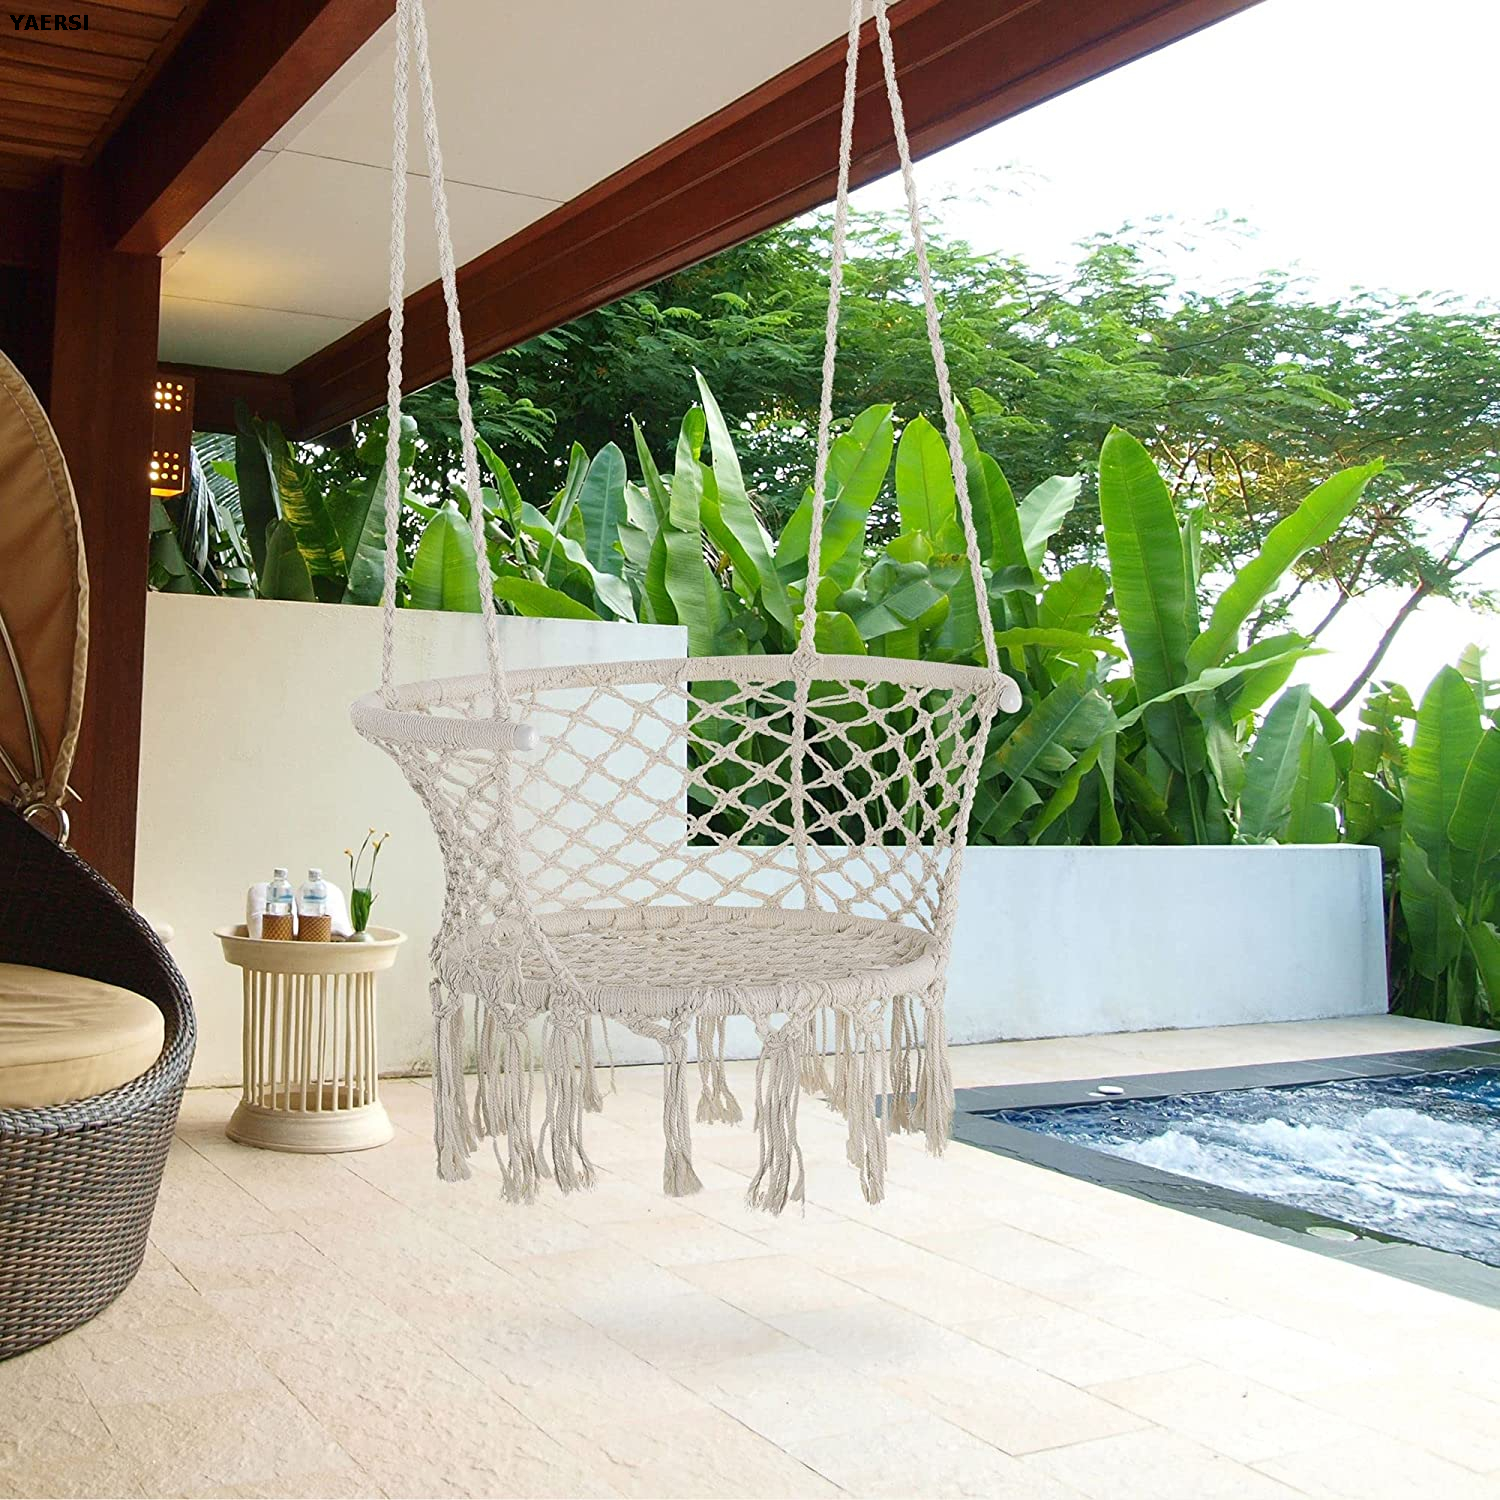 Macrame Hammock Swing Chair for Inddor And Outdoor